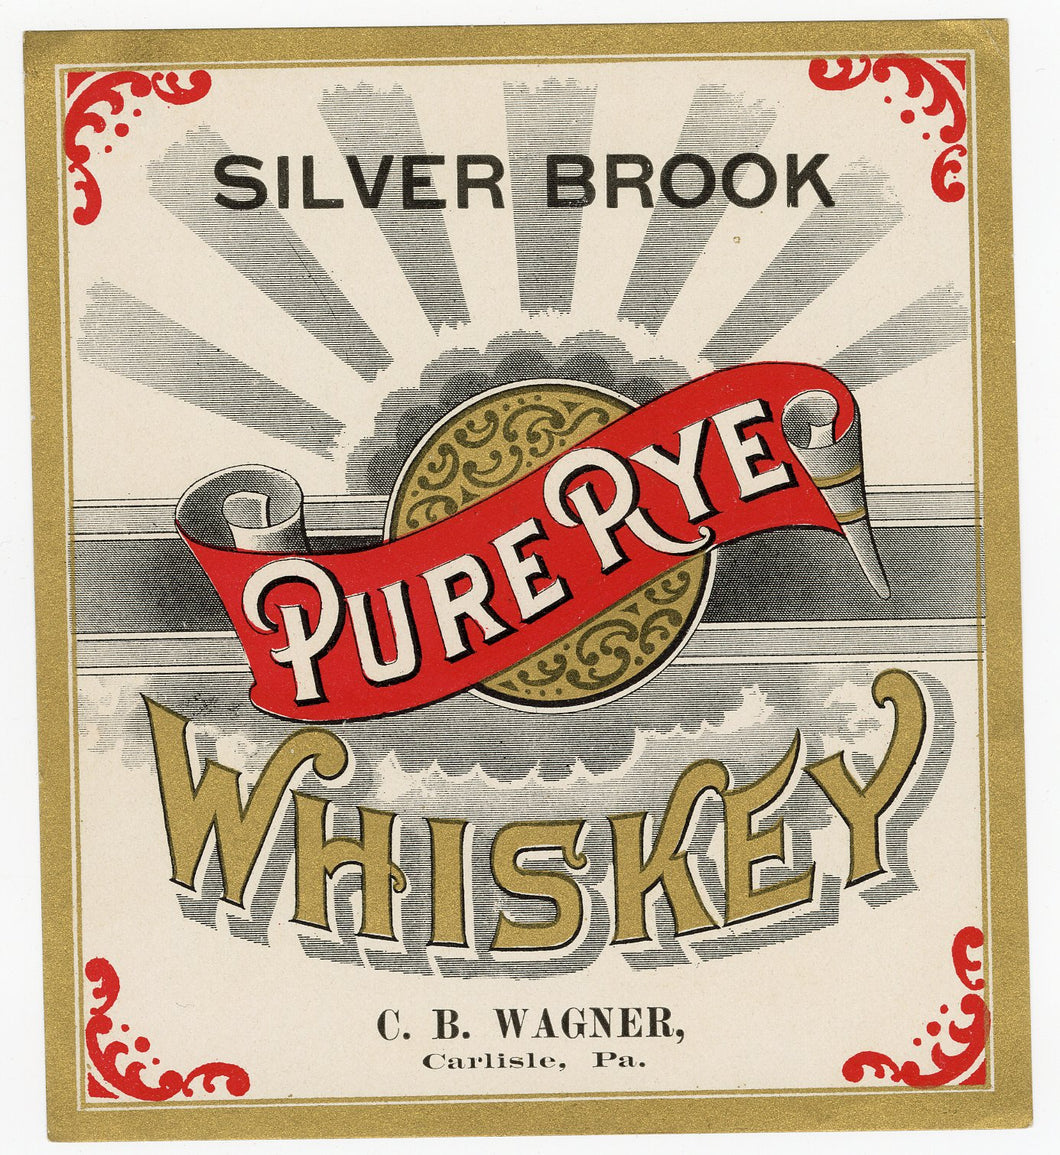 Old Vintage, SILVER BROOK Pure Rye WHISKEY Label, C.B. Wagner, Alcohol - TheBoxSF